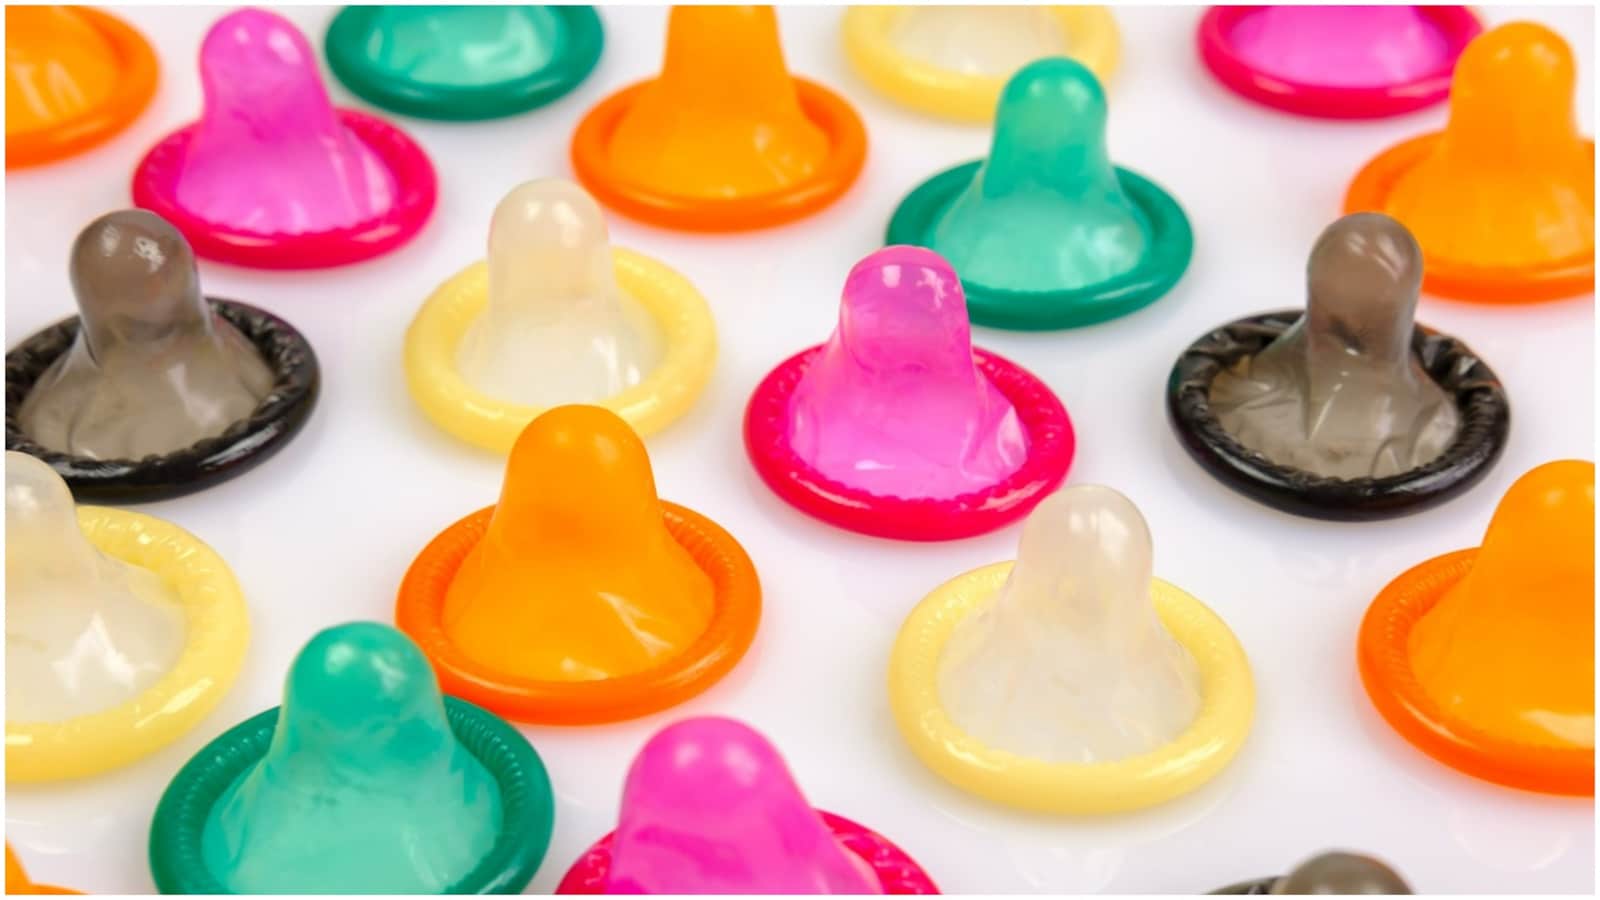 students in west bengal get addicted to flavoured condoms to get 'high'